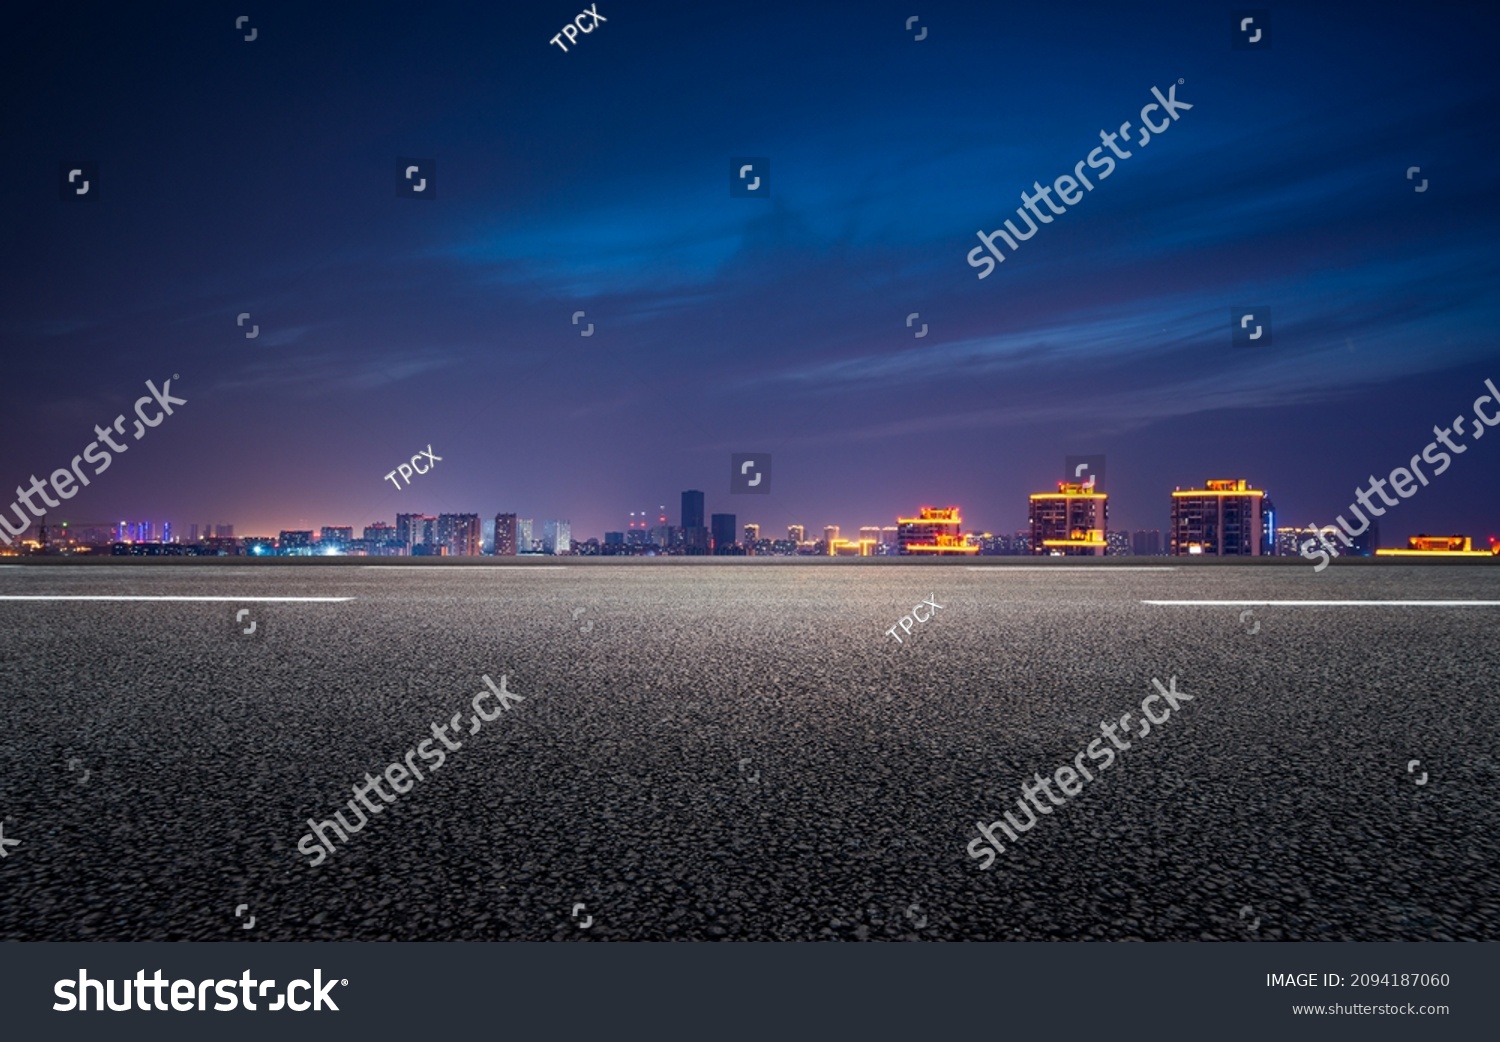 The night view of the city in front of the asphalt road #2094187060